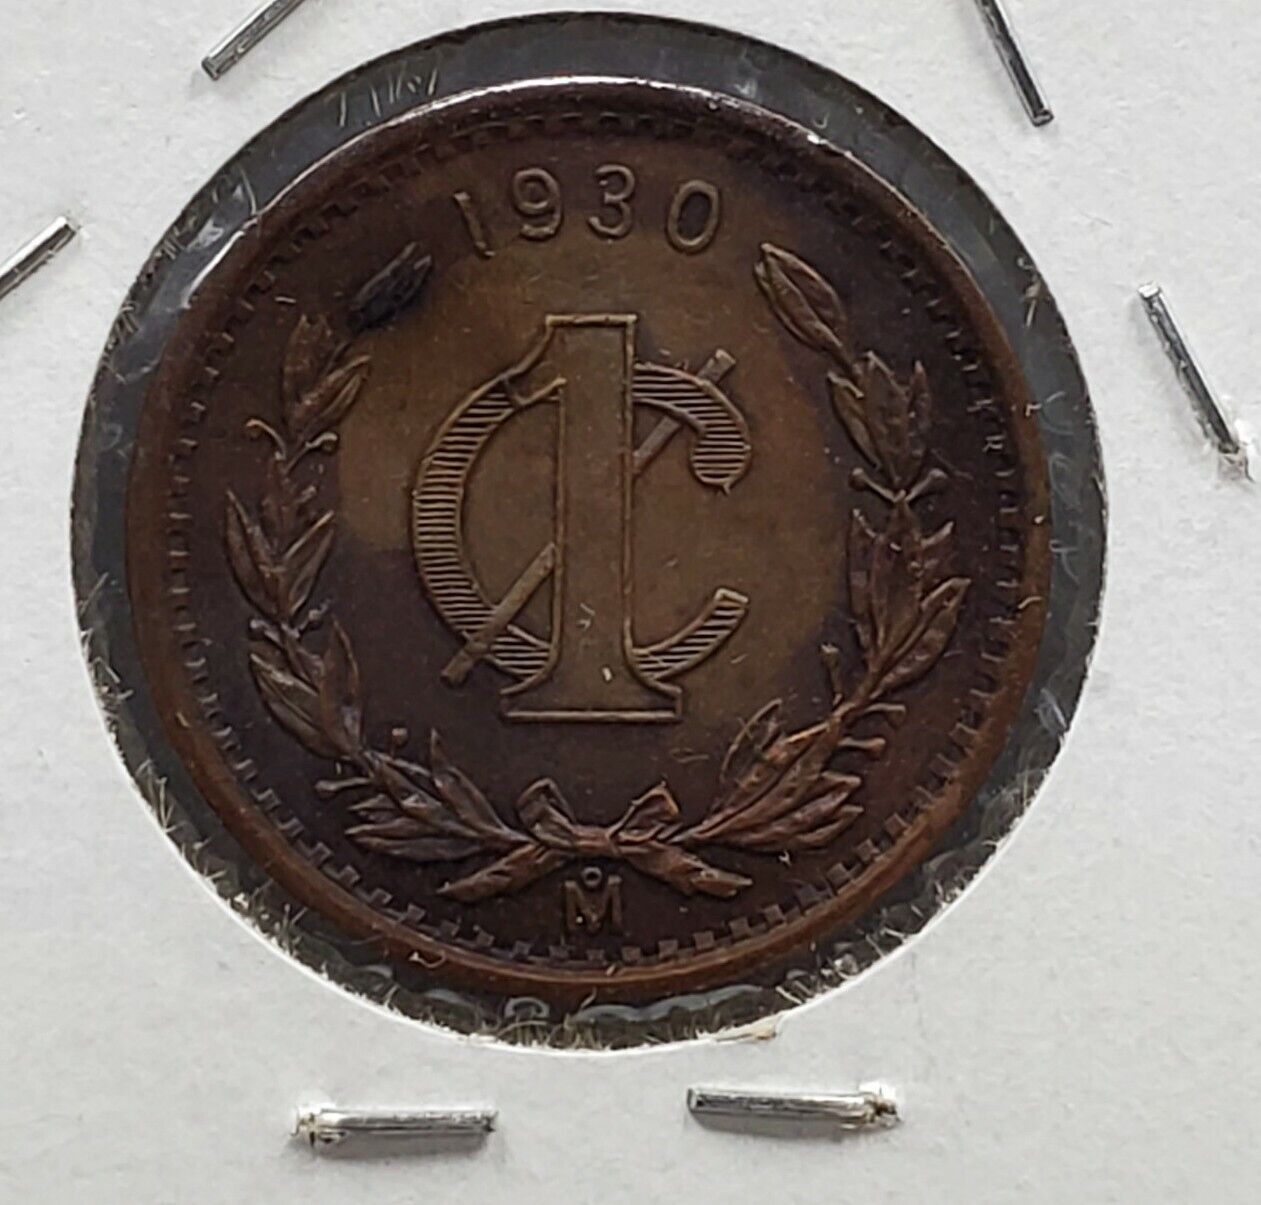 1930 Mexico 1c One Centavo Centavos Coin CHOICE AU ABOUT UNC BROWN